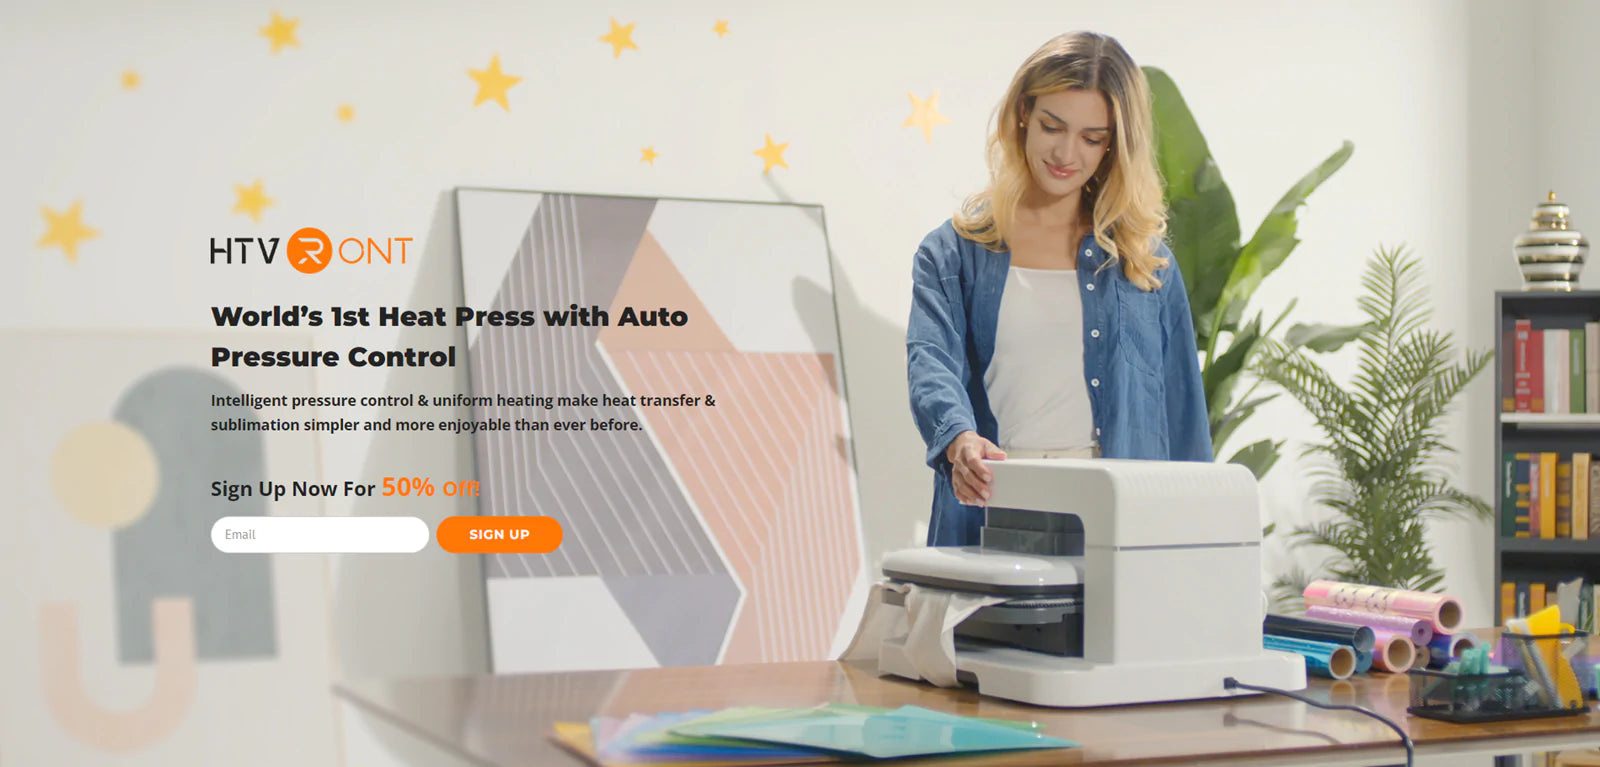 Auto Heat Press on Crowdfunding Campaign Now